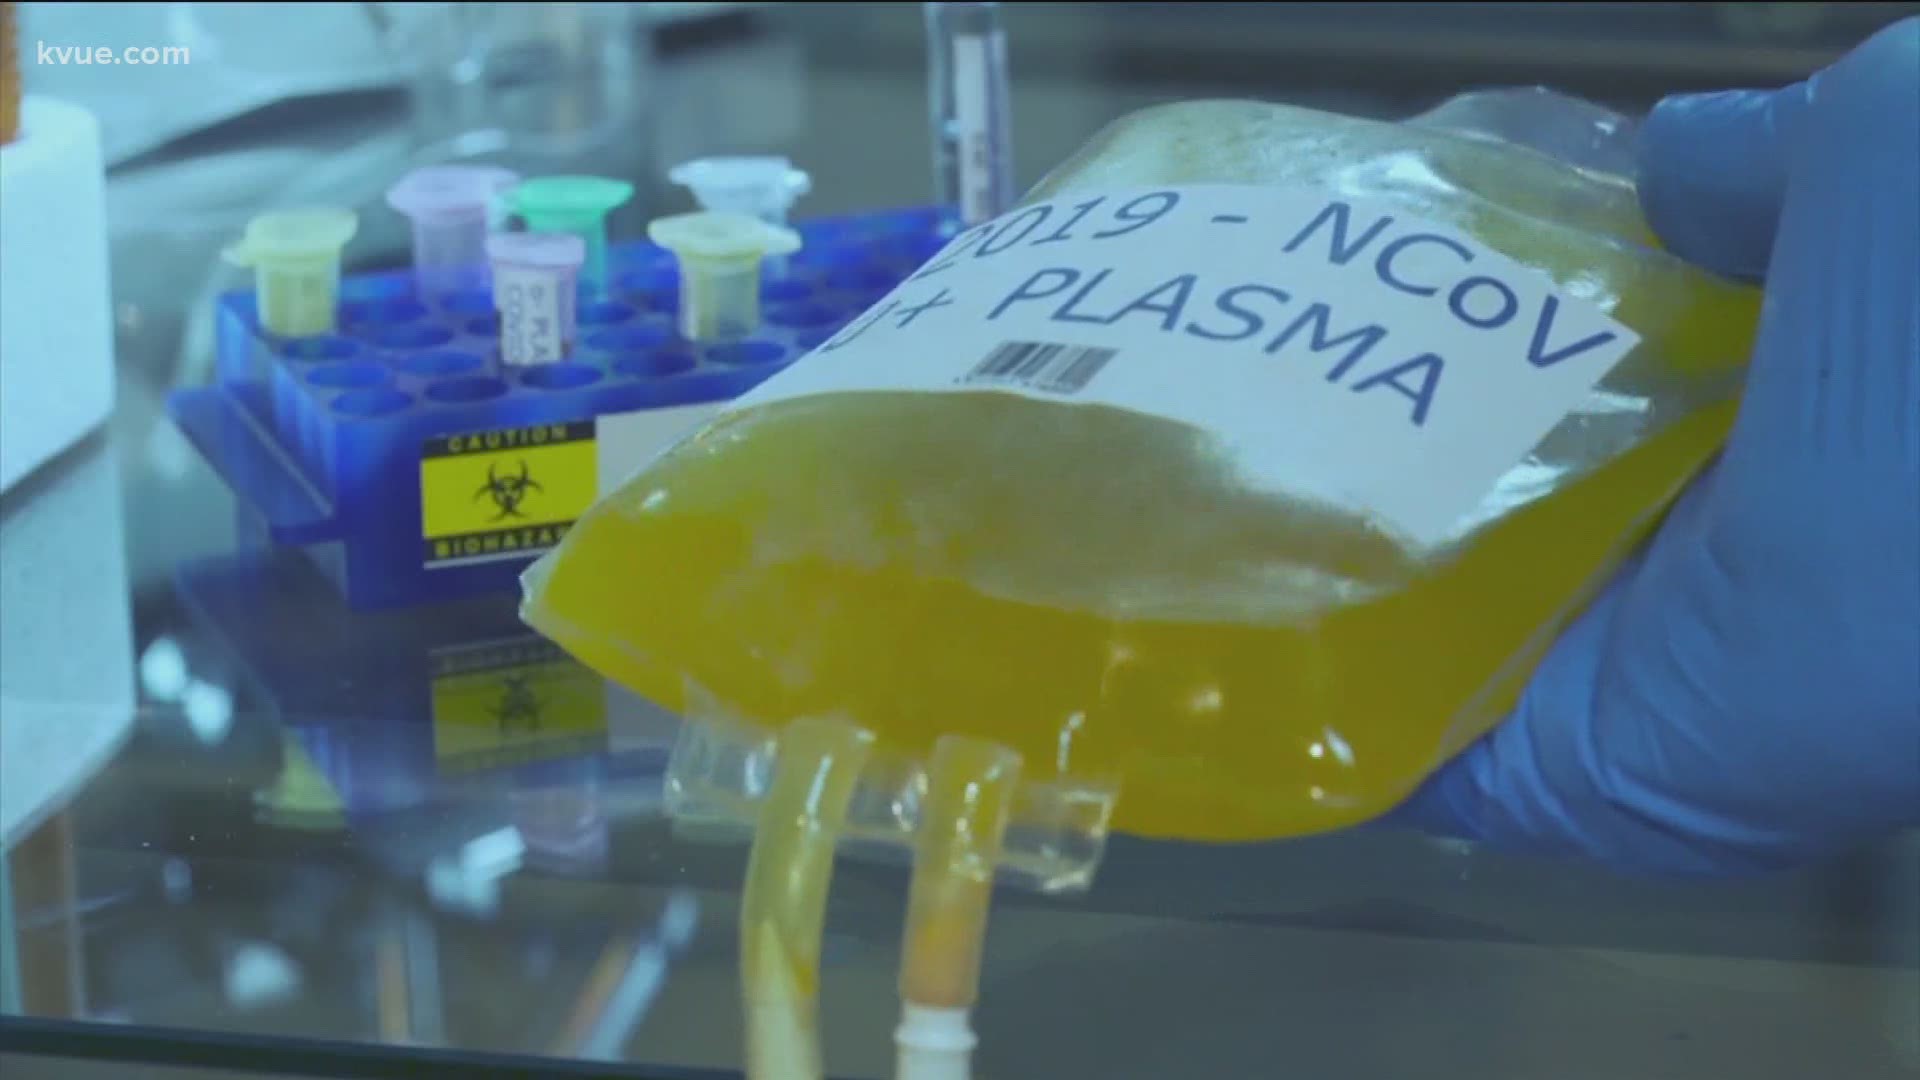 COVID-19 convalescent plasma therapy is safe, study finds | ktvb.com